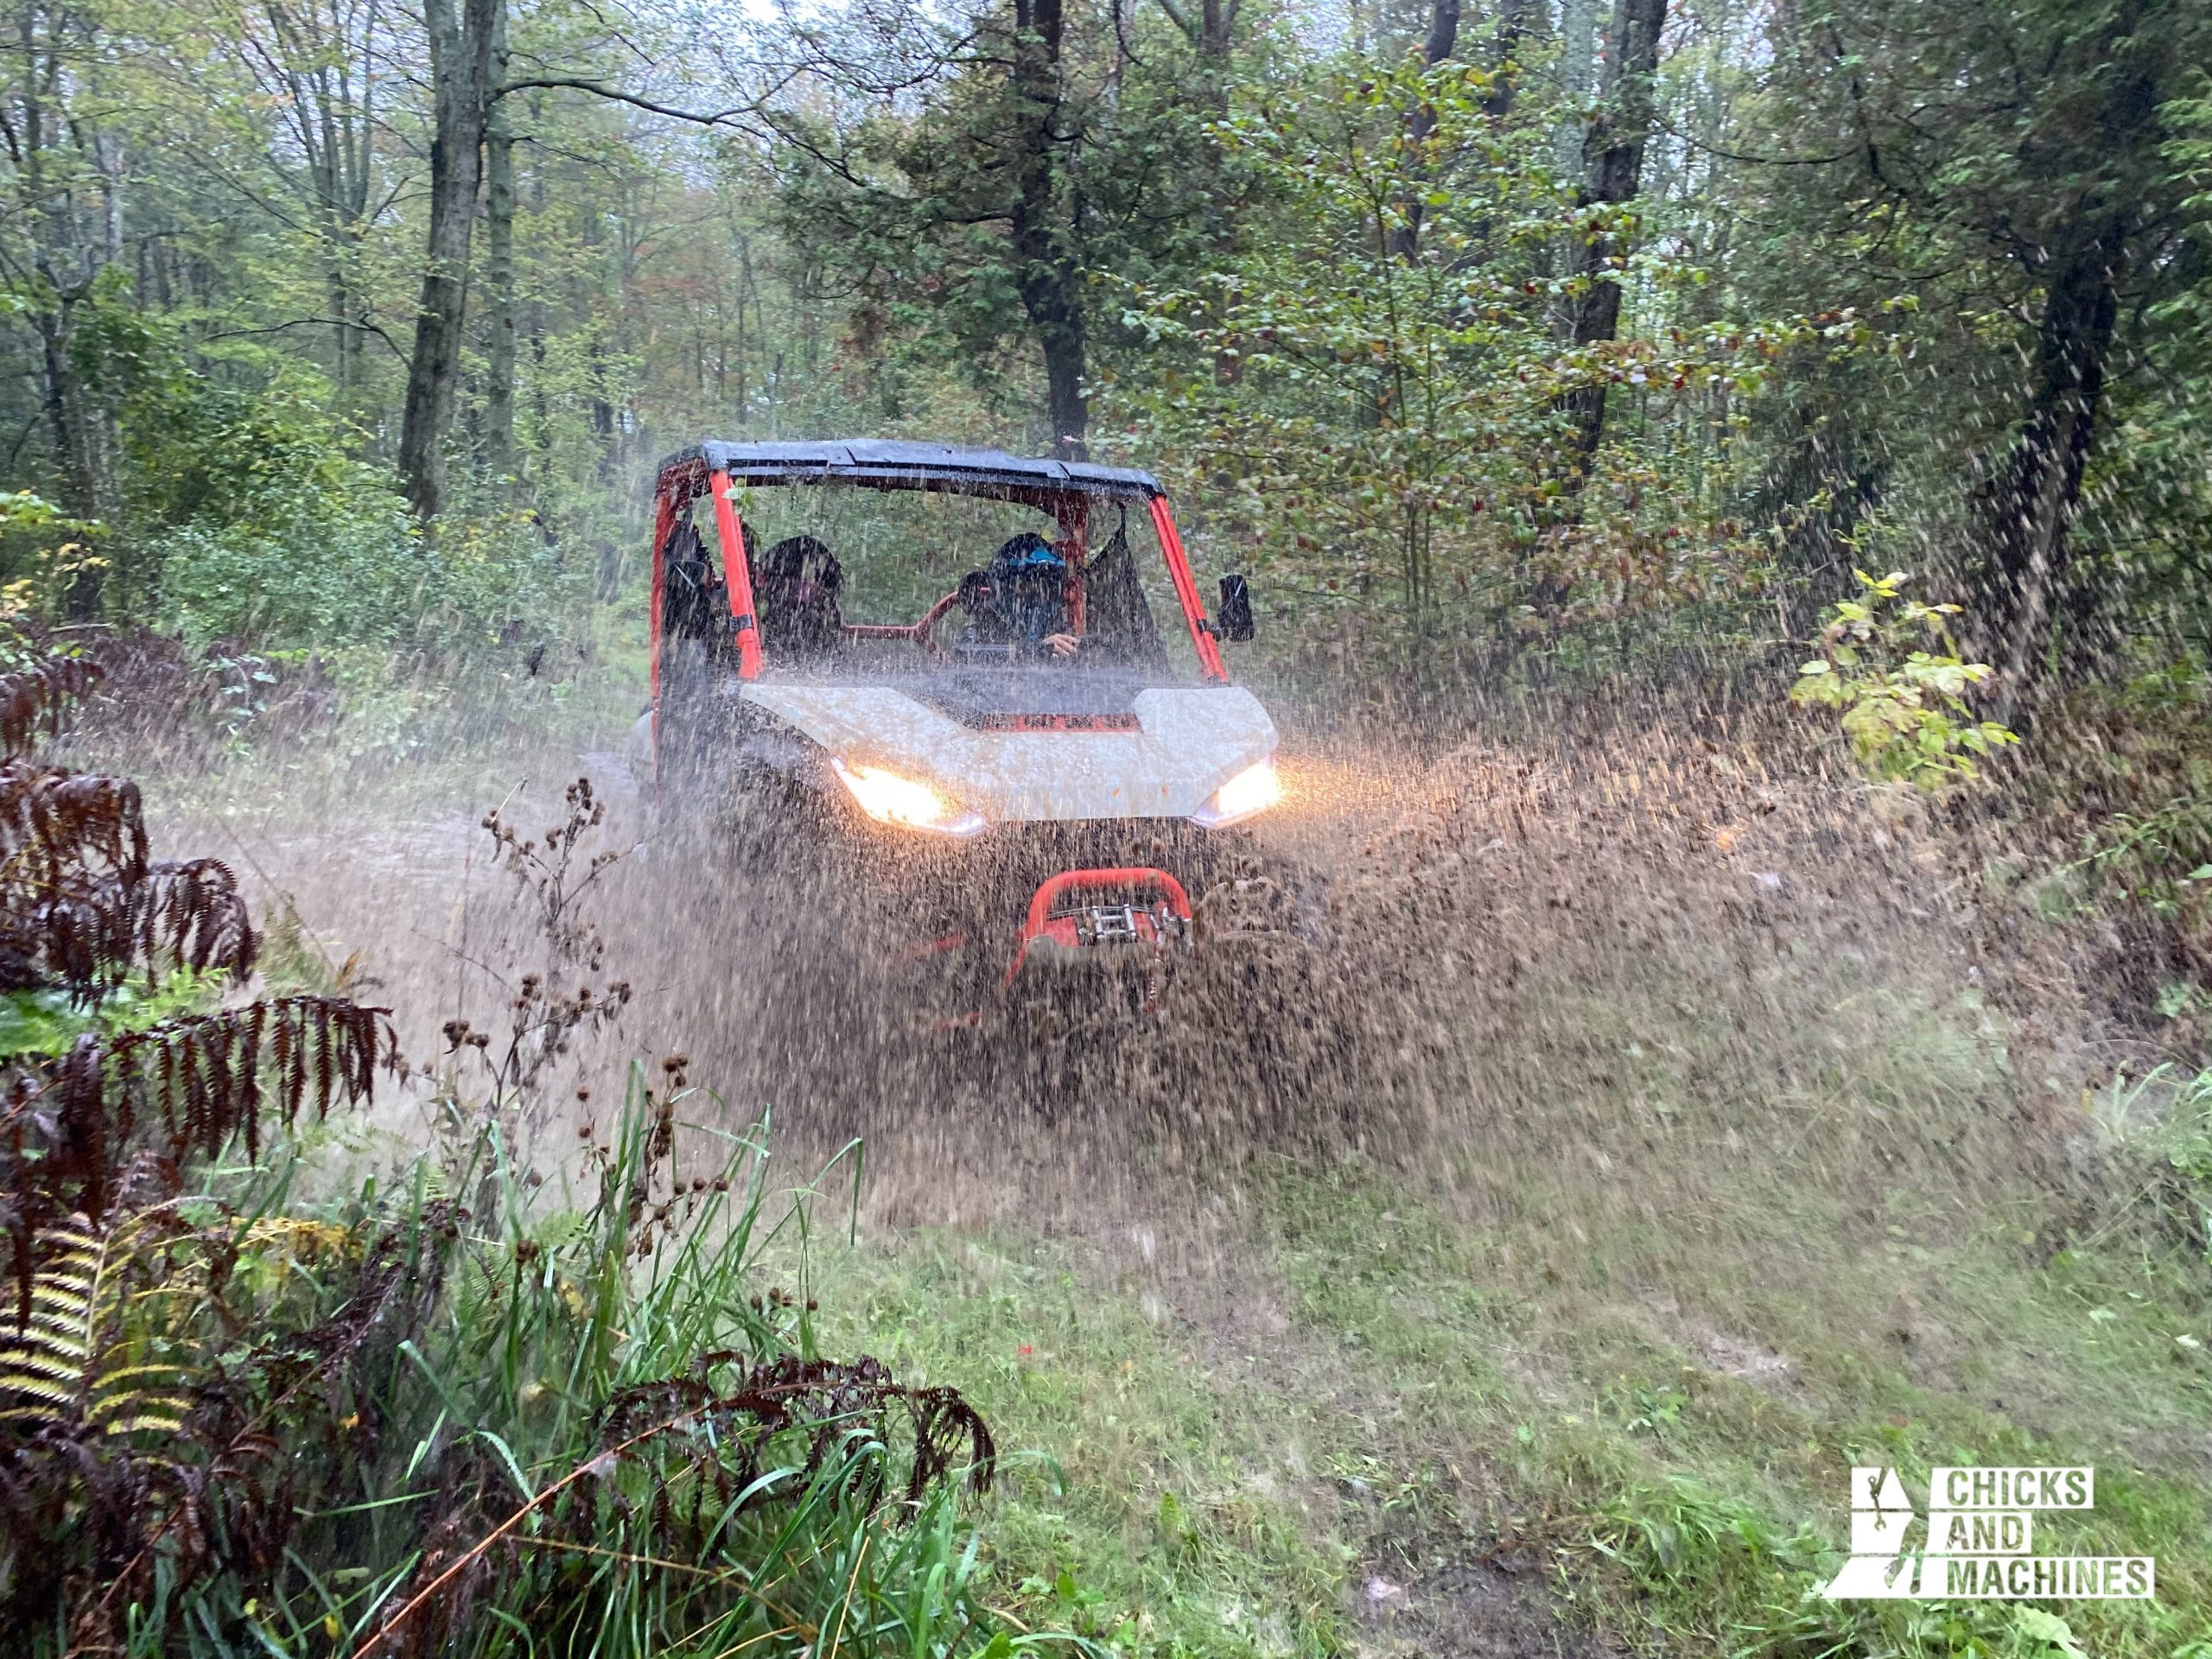 The suspension and shock absorbers allow you to venture into all types of terrain without any problems!